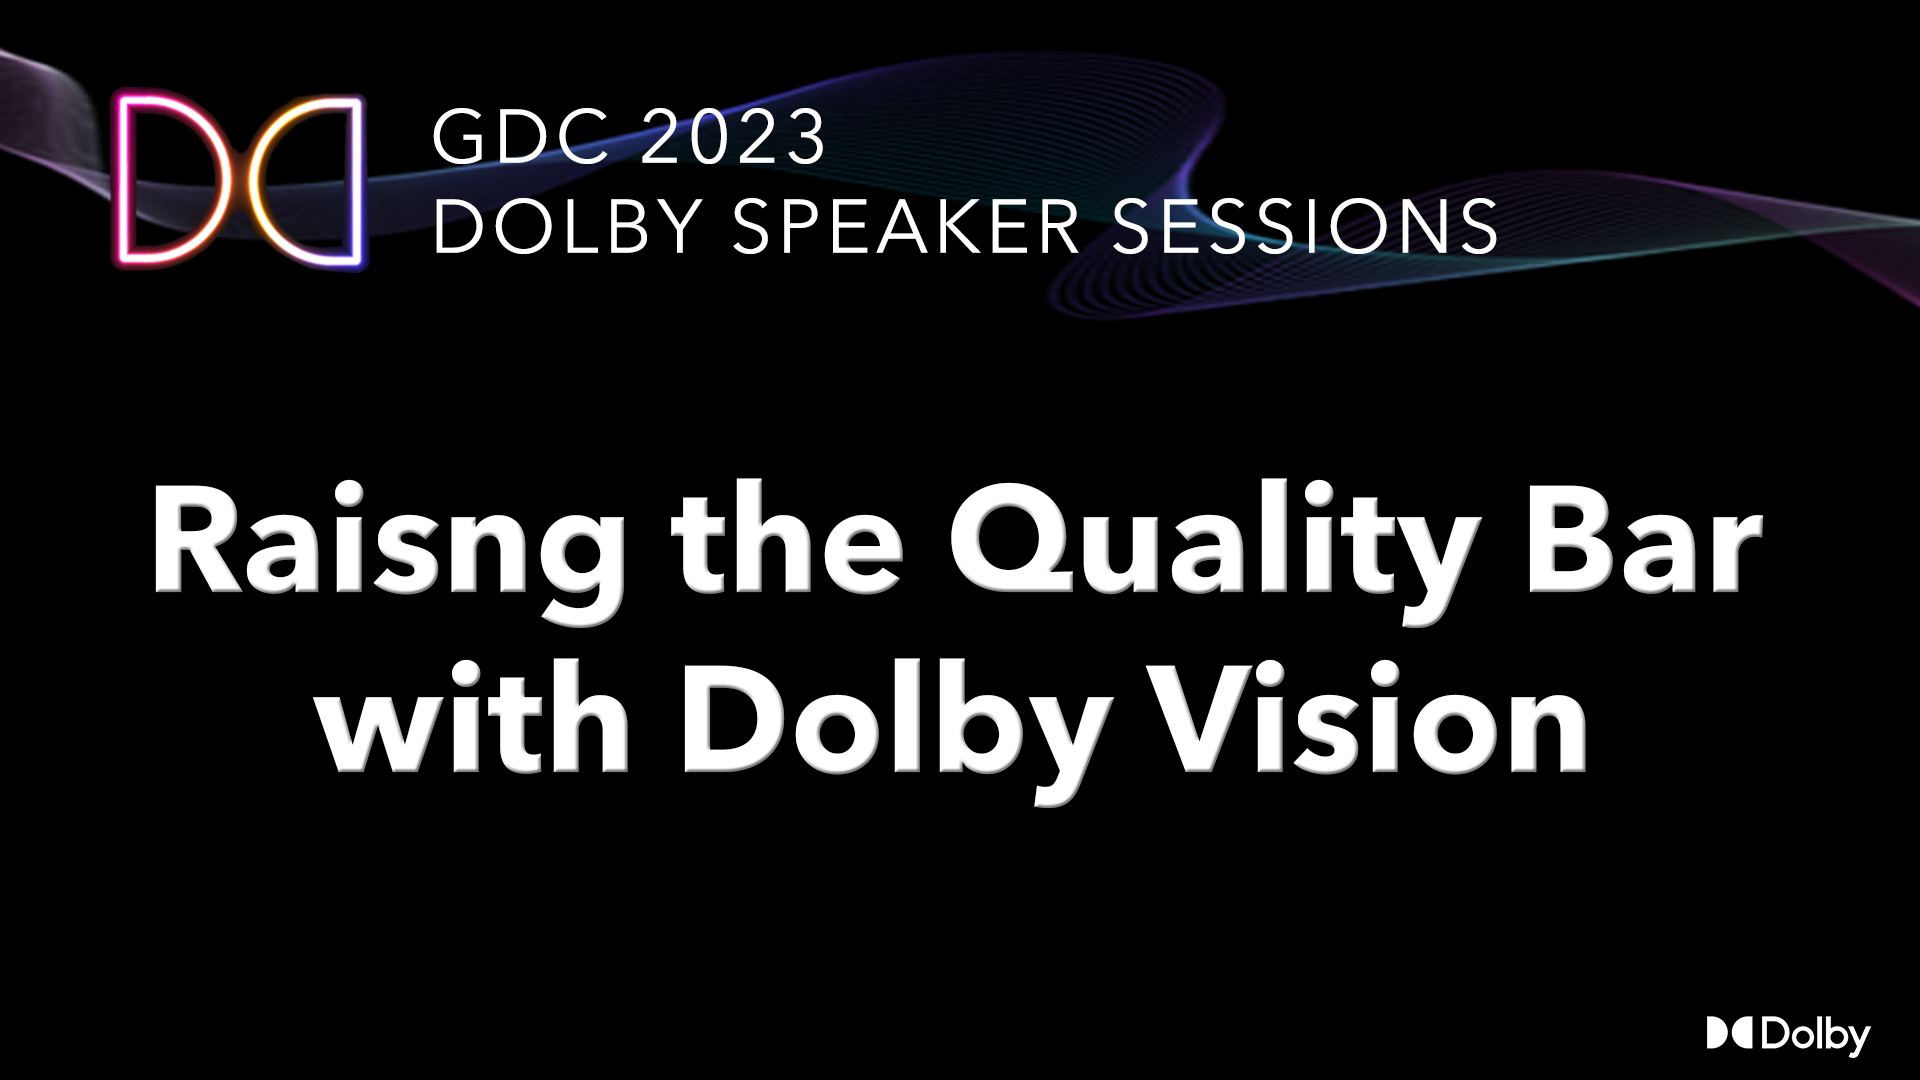 GDC 2023 - Dolby Vision